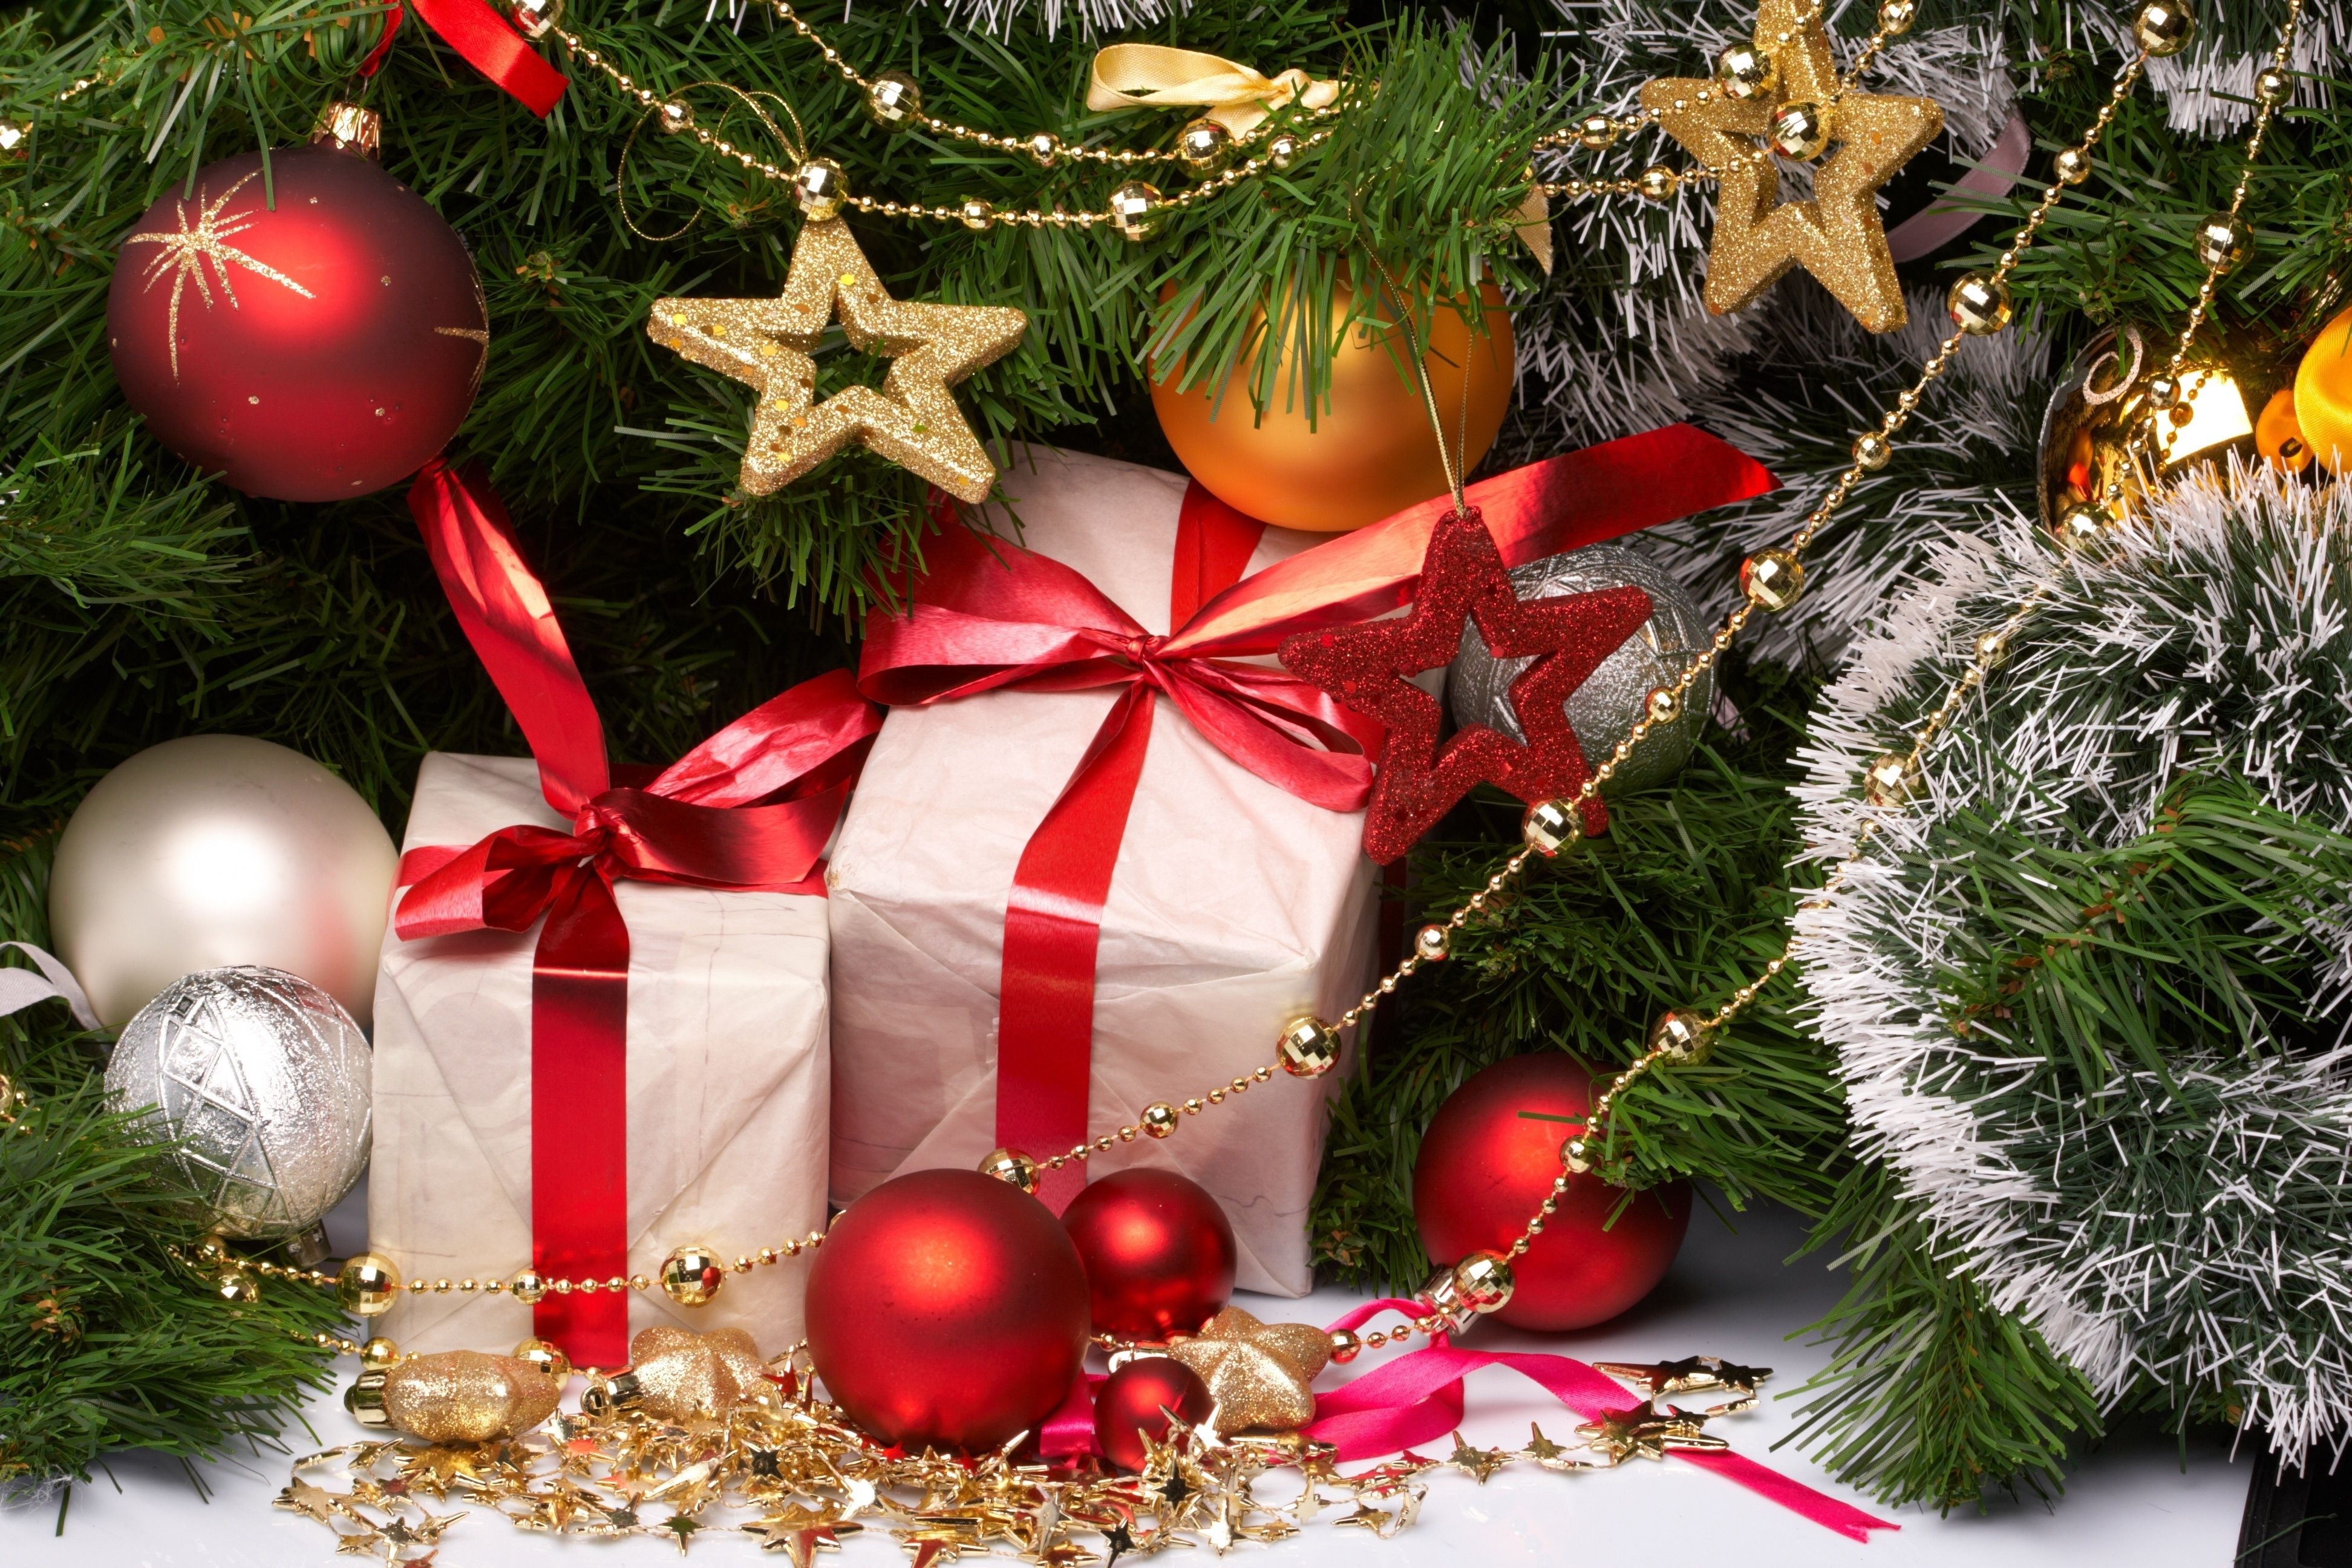 Christmas presents under the tree wallpaper and image